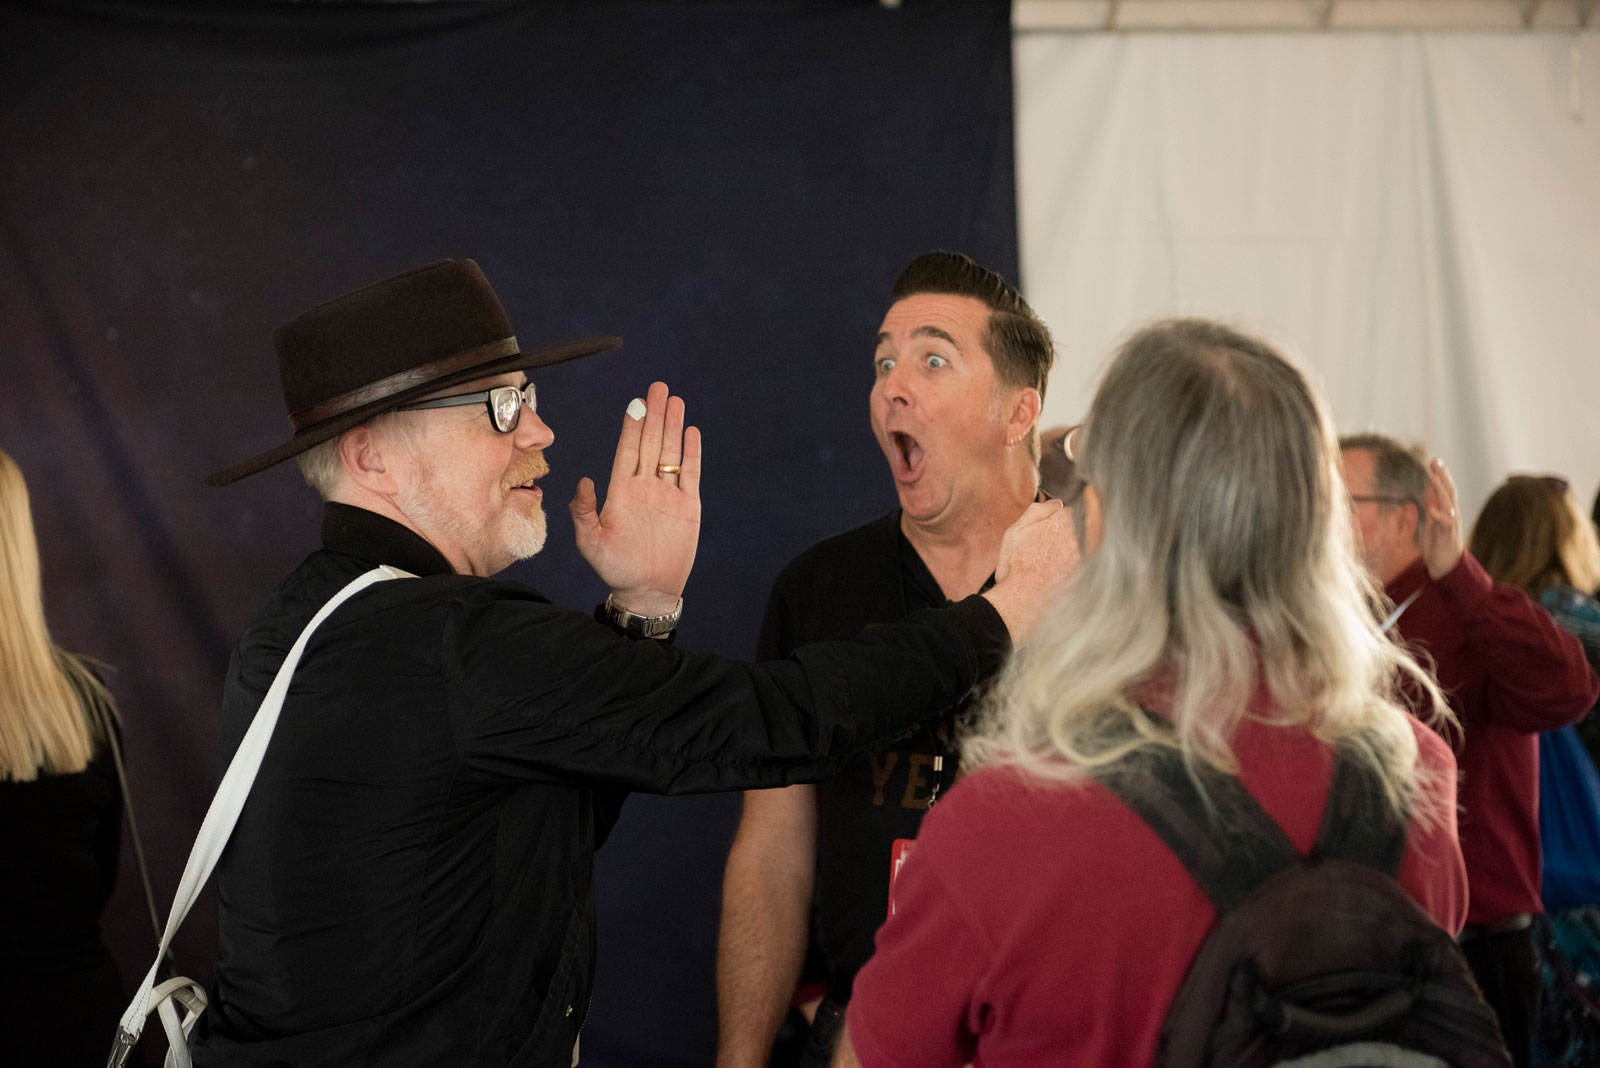 Mythbuster Adam Savage and Engineer Adam Steltzner at NASA's Jet Propulsion Laboratory on Nov. 26, 2018, for the landing of InSight on Mars.